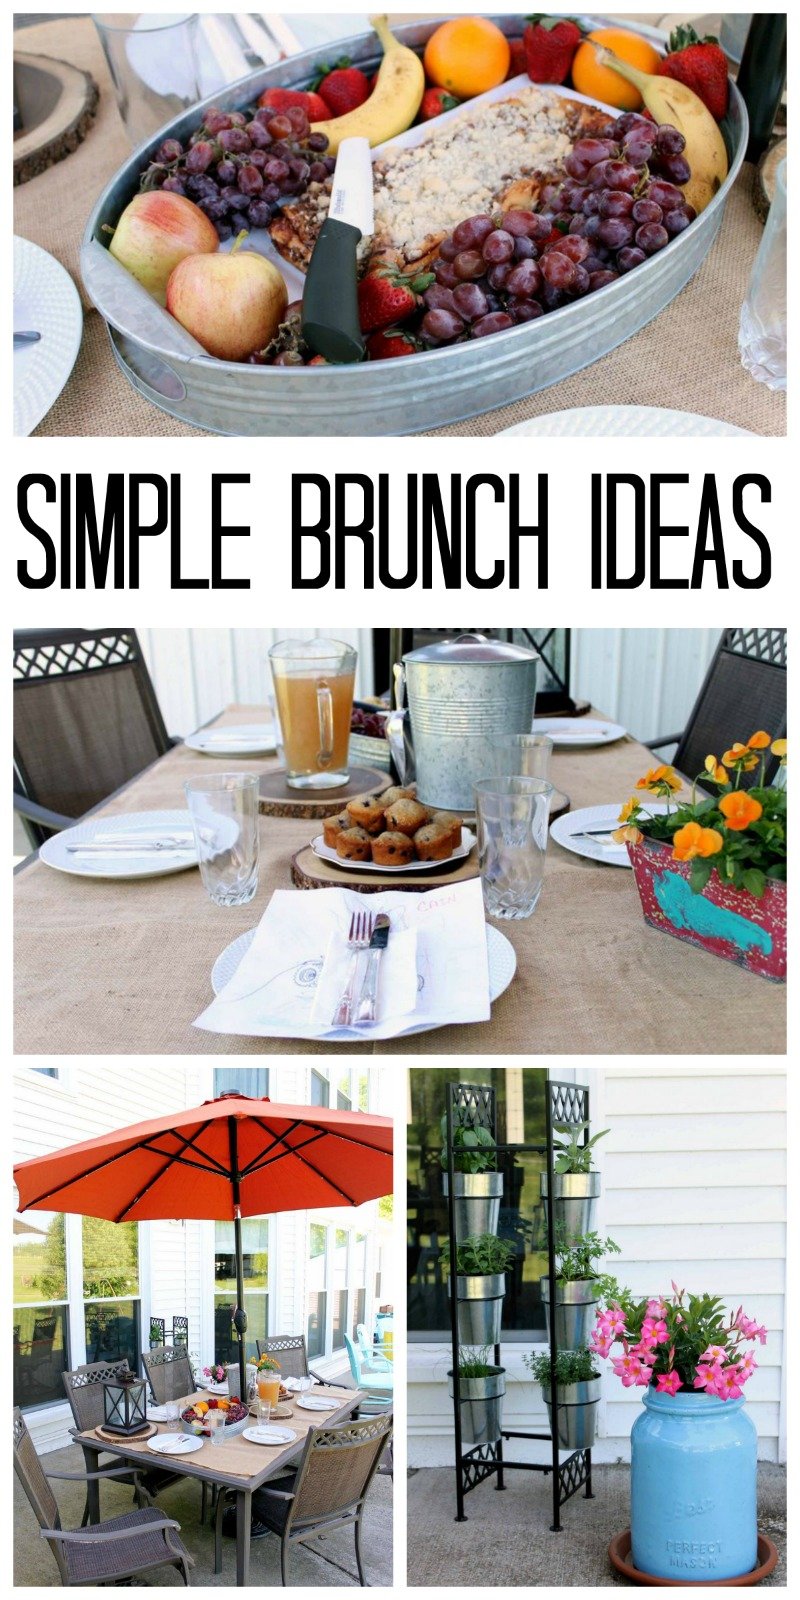 These simple brunch ideas are perfect for Mother's Day or any occasion! If you love an outdoor get together with family, this is the post for you!